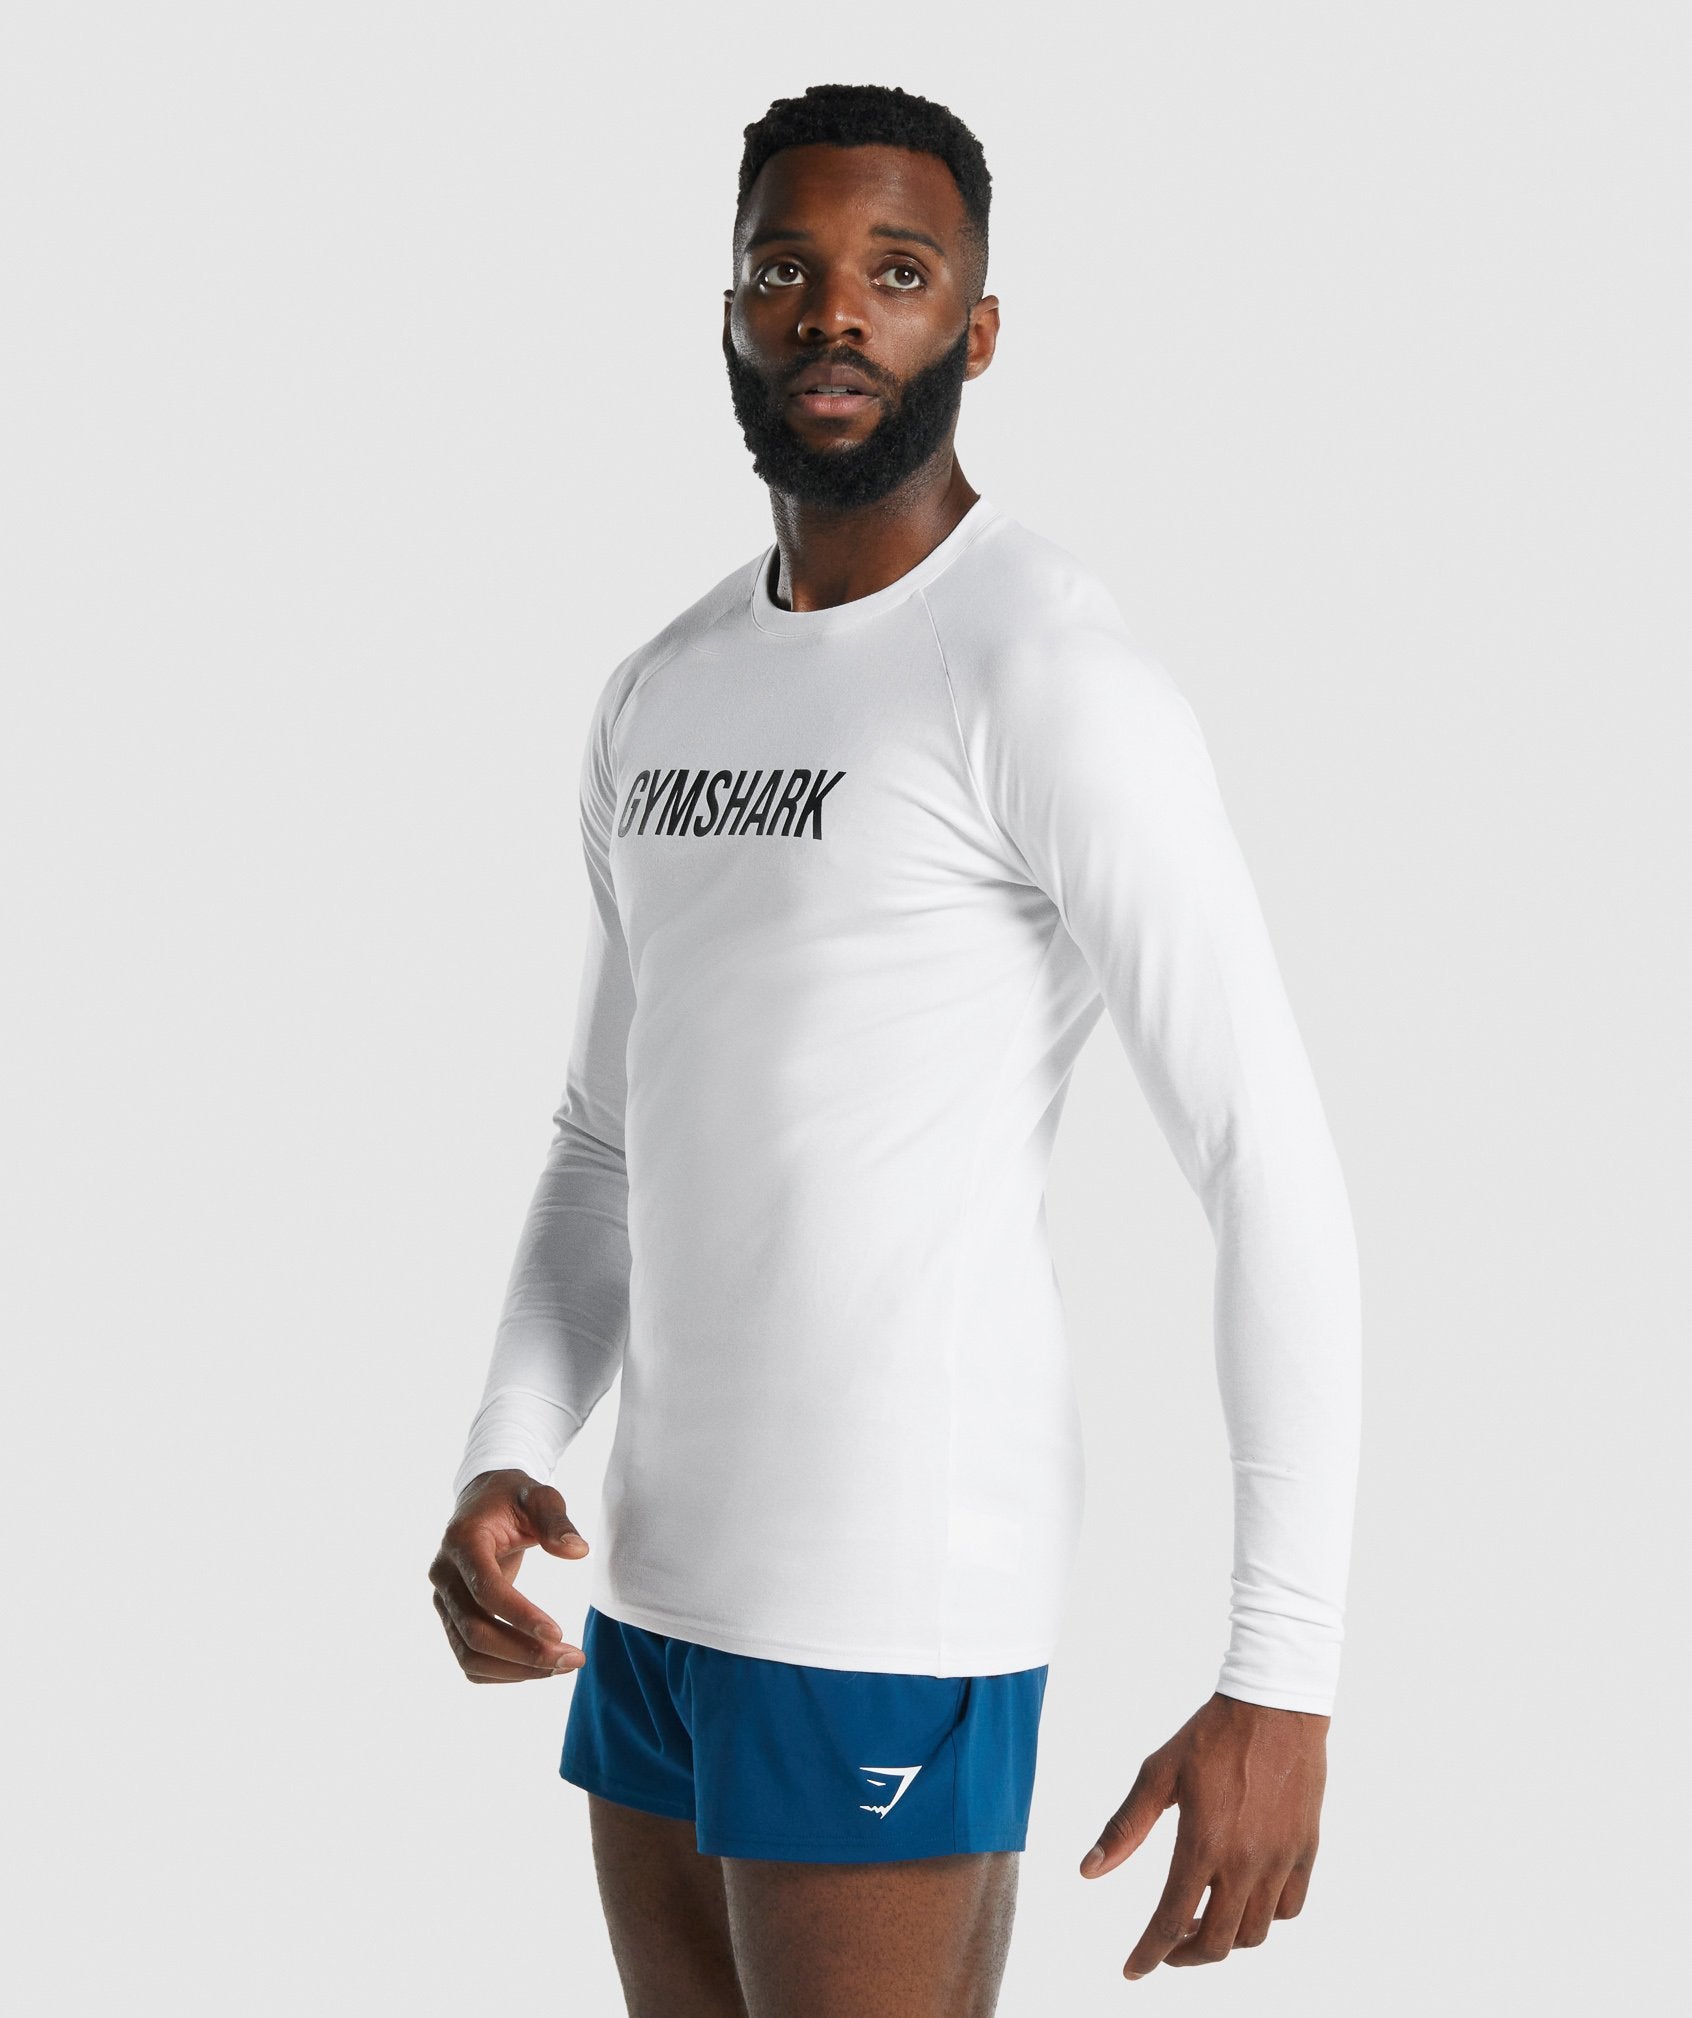 Apollo Long Sleeve T-Shirt in White